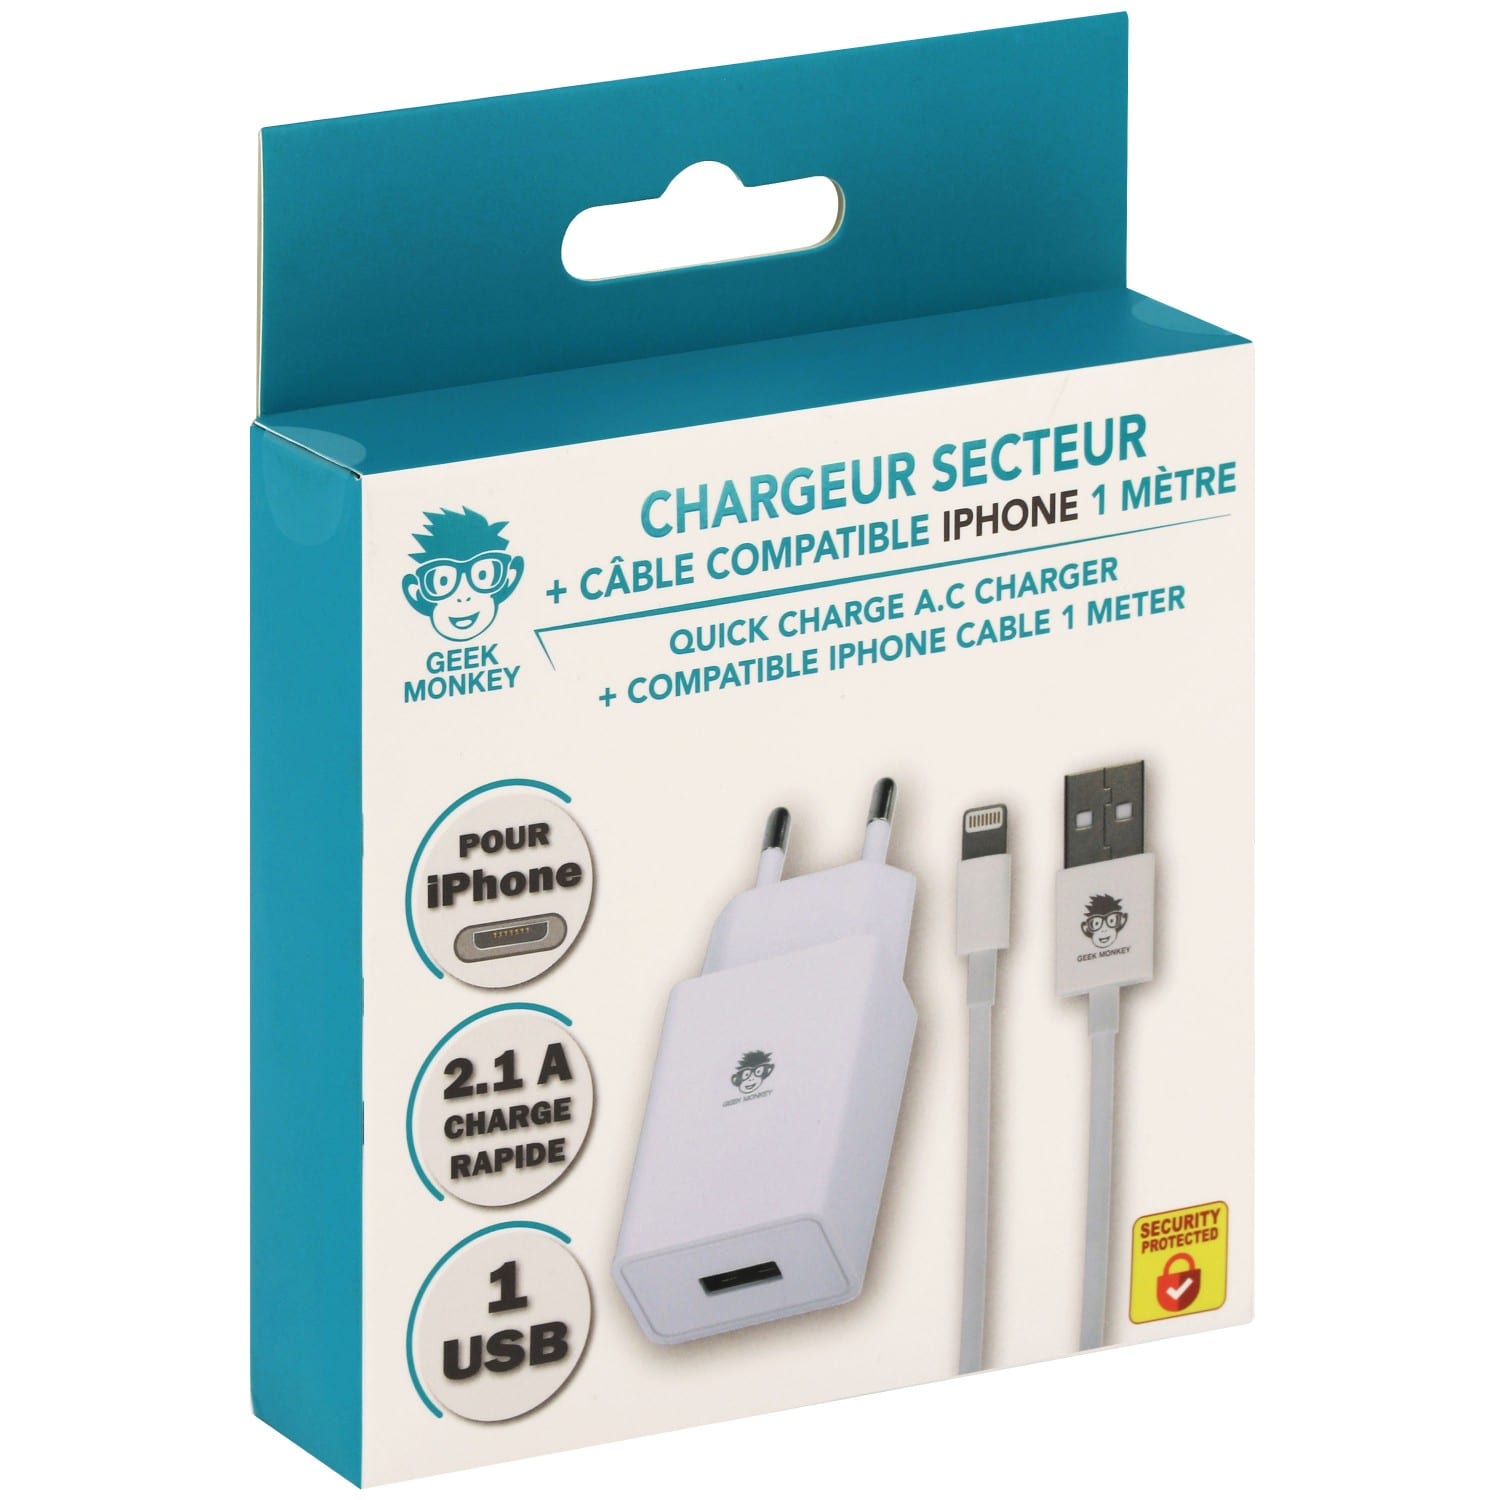 General - Chargeur iPhone charge rapide bloc chargeur mural Apple